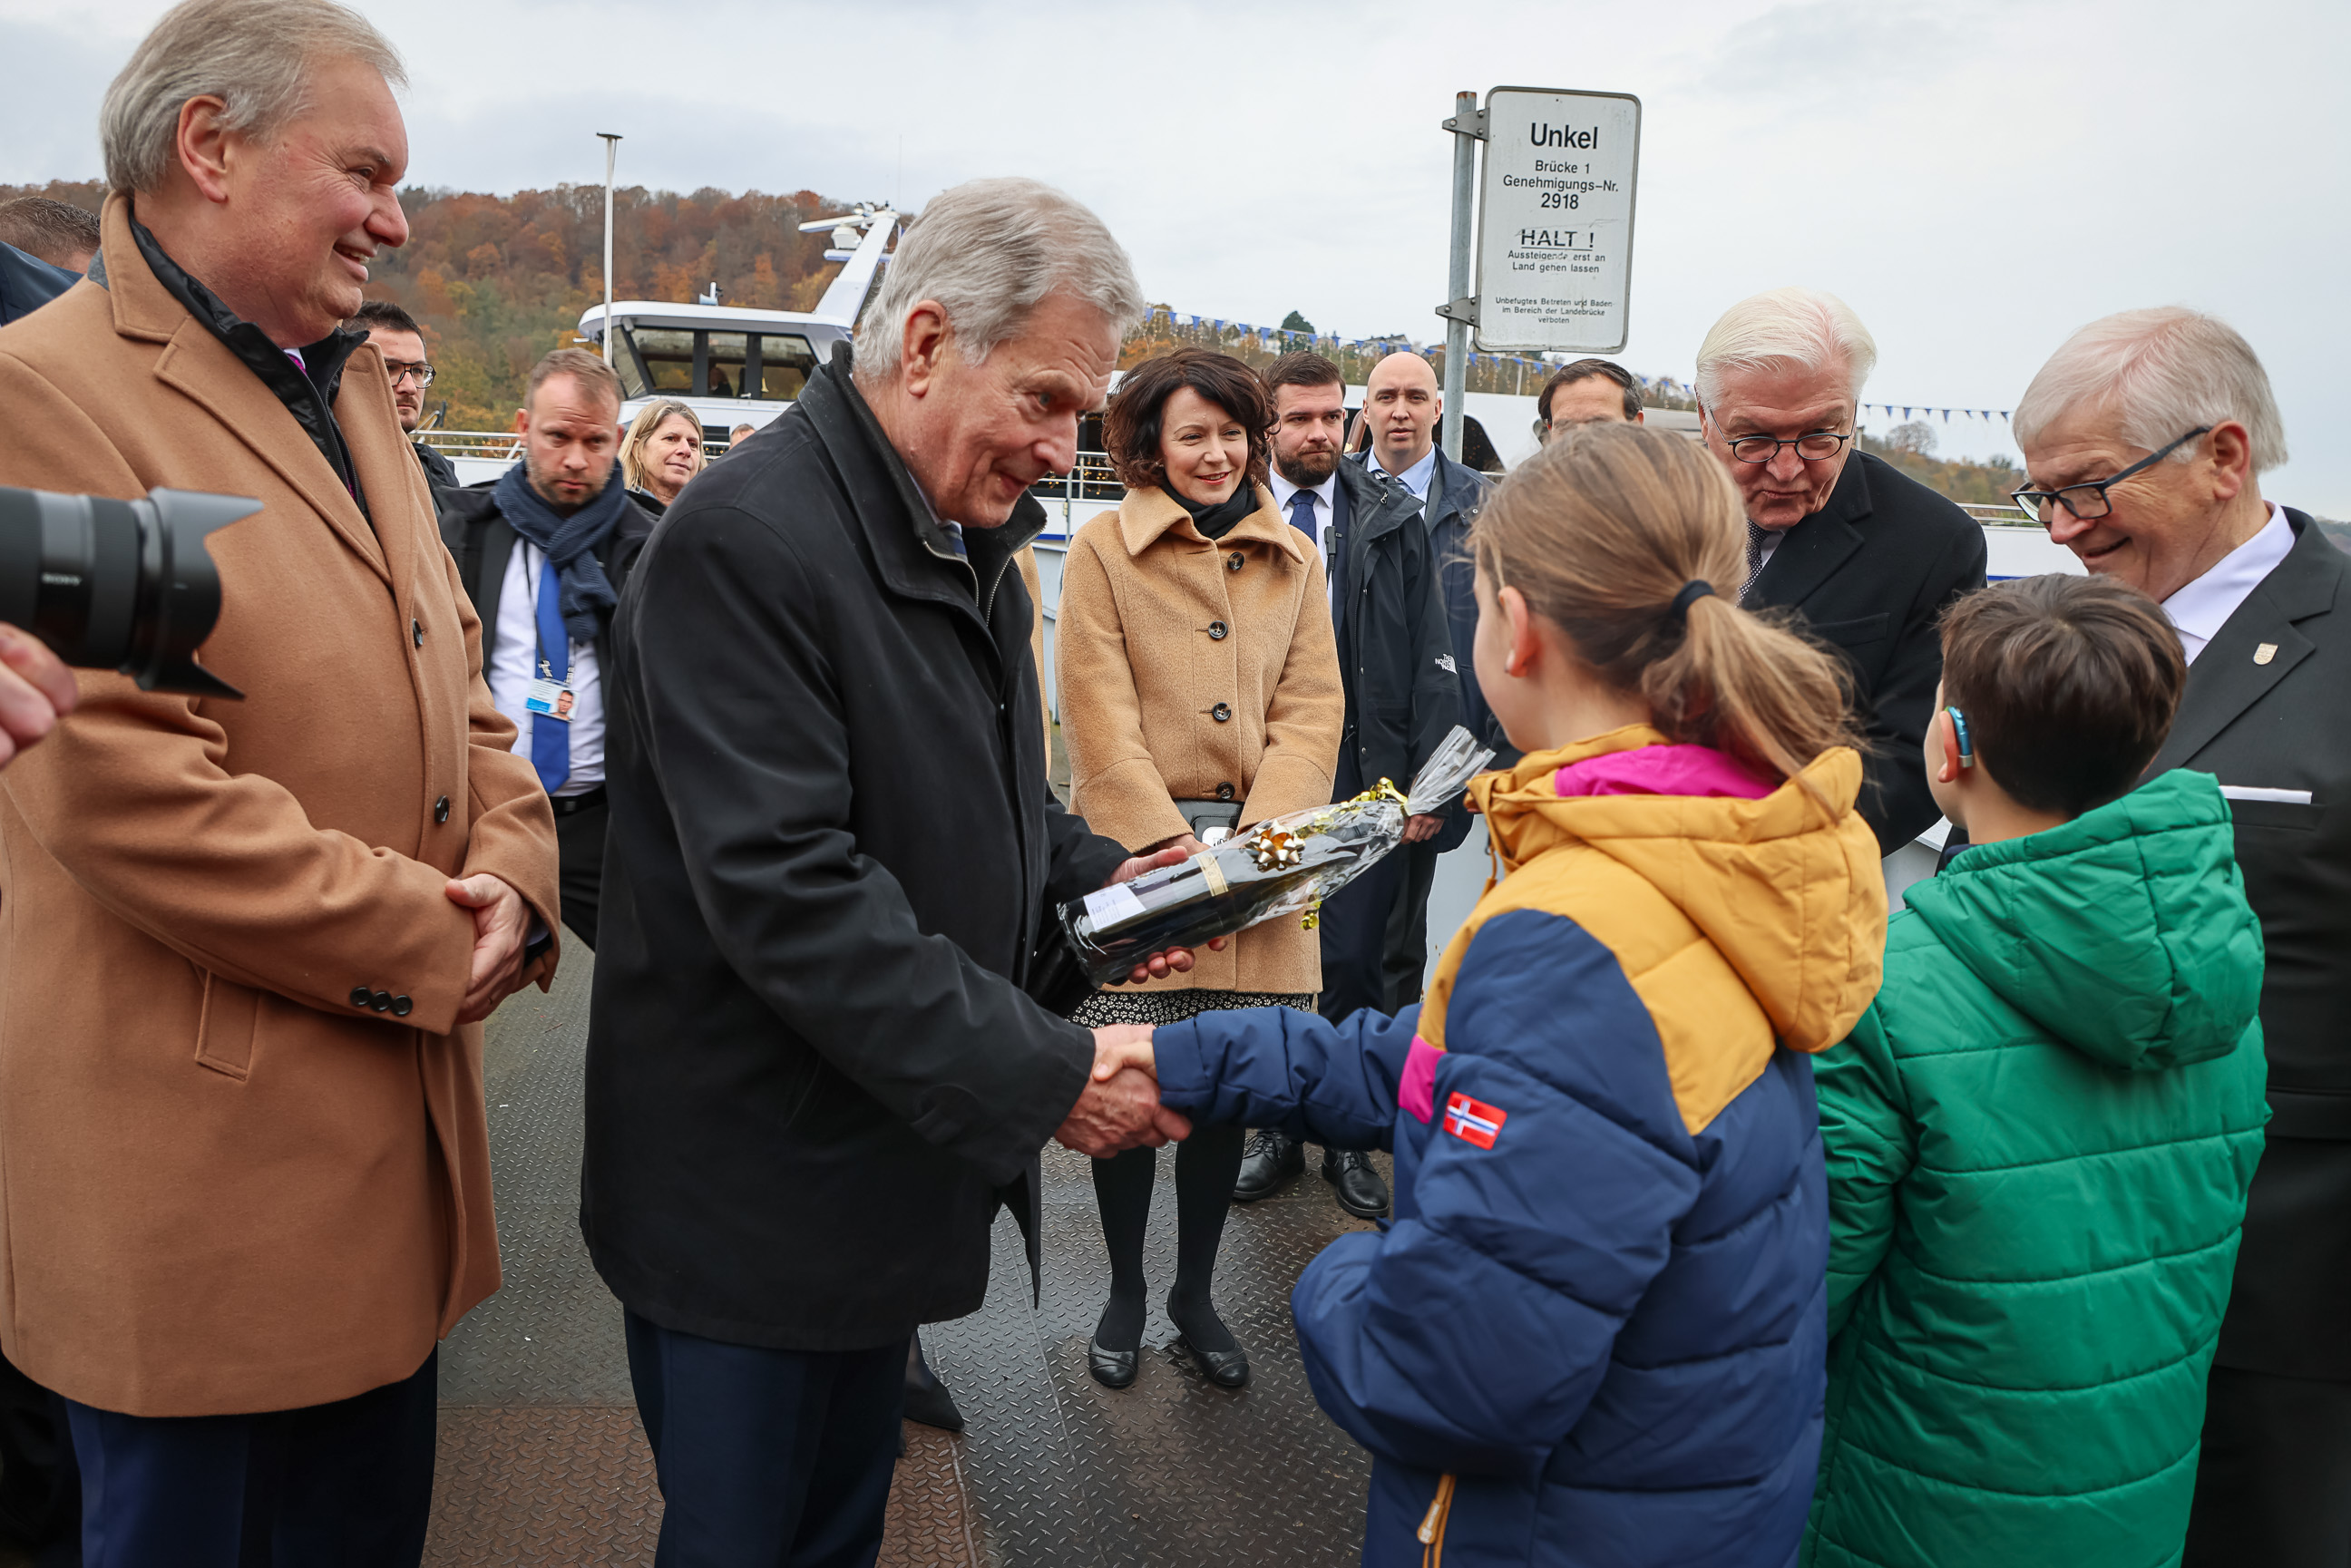 At the end of the visit, the Presidents and their spouses took a walking tour of the old town of Unkel. Photo: Riikka Hietajärvi/Office of the President of the Republic of Finland